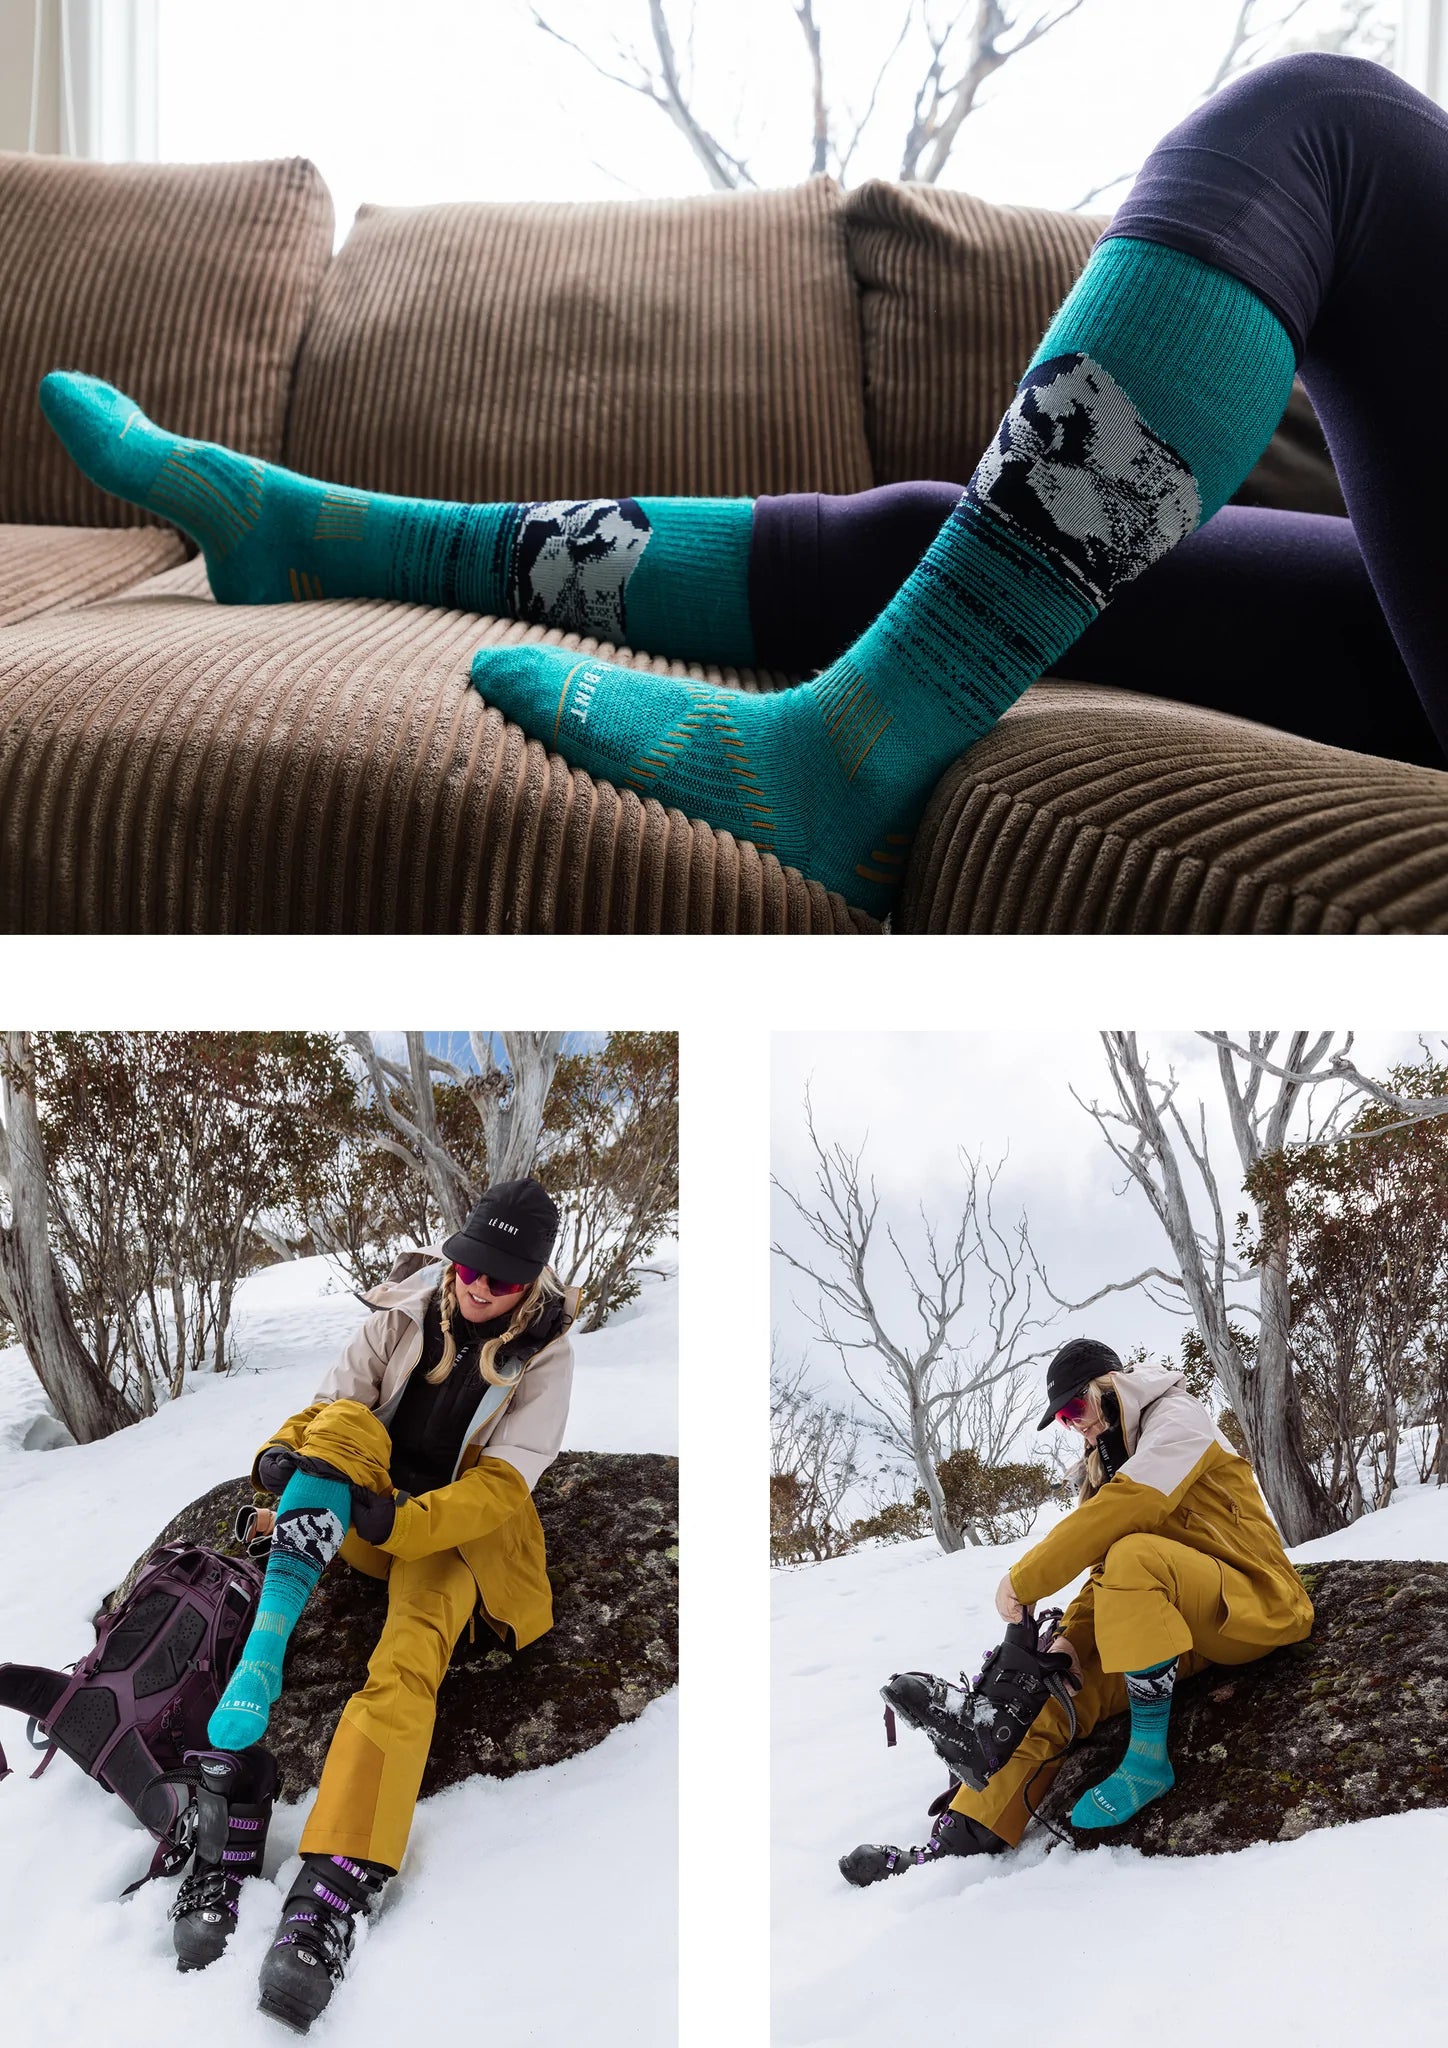 Comfort and Performance — Picking The Perfect Pair of Ski Socks